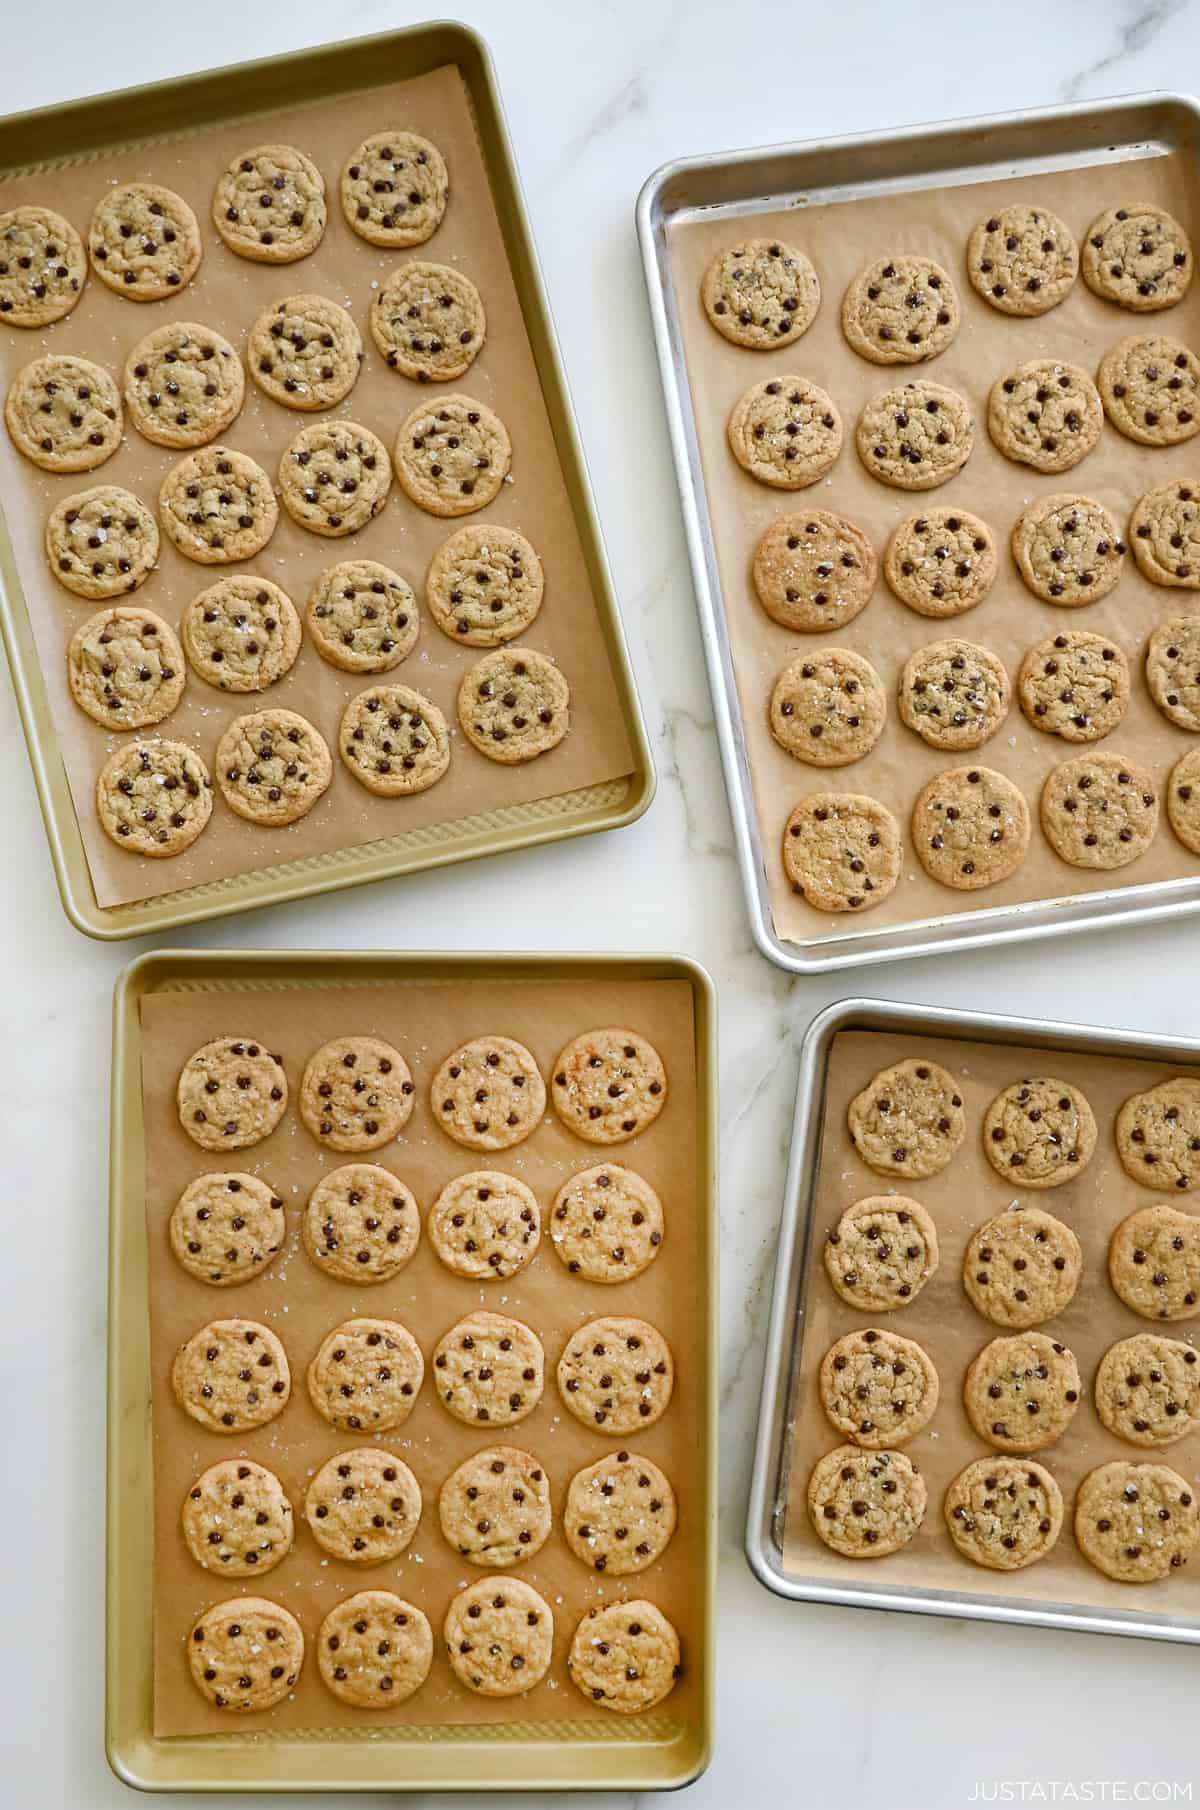 Four baking sheets all containing perfectly golden-brown mini chocolate chip cookies.